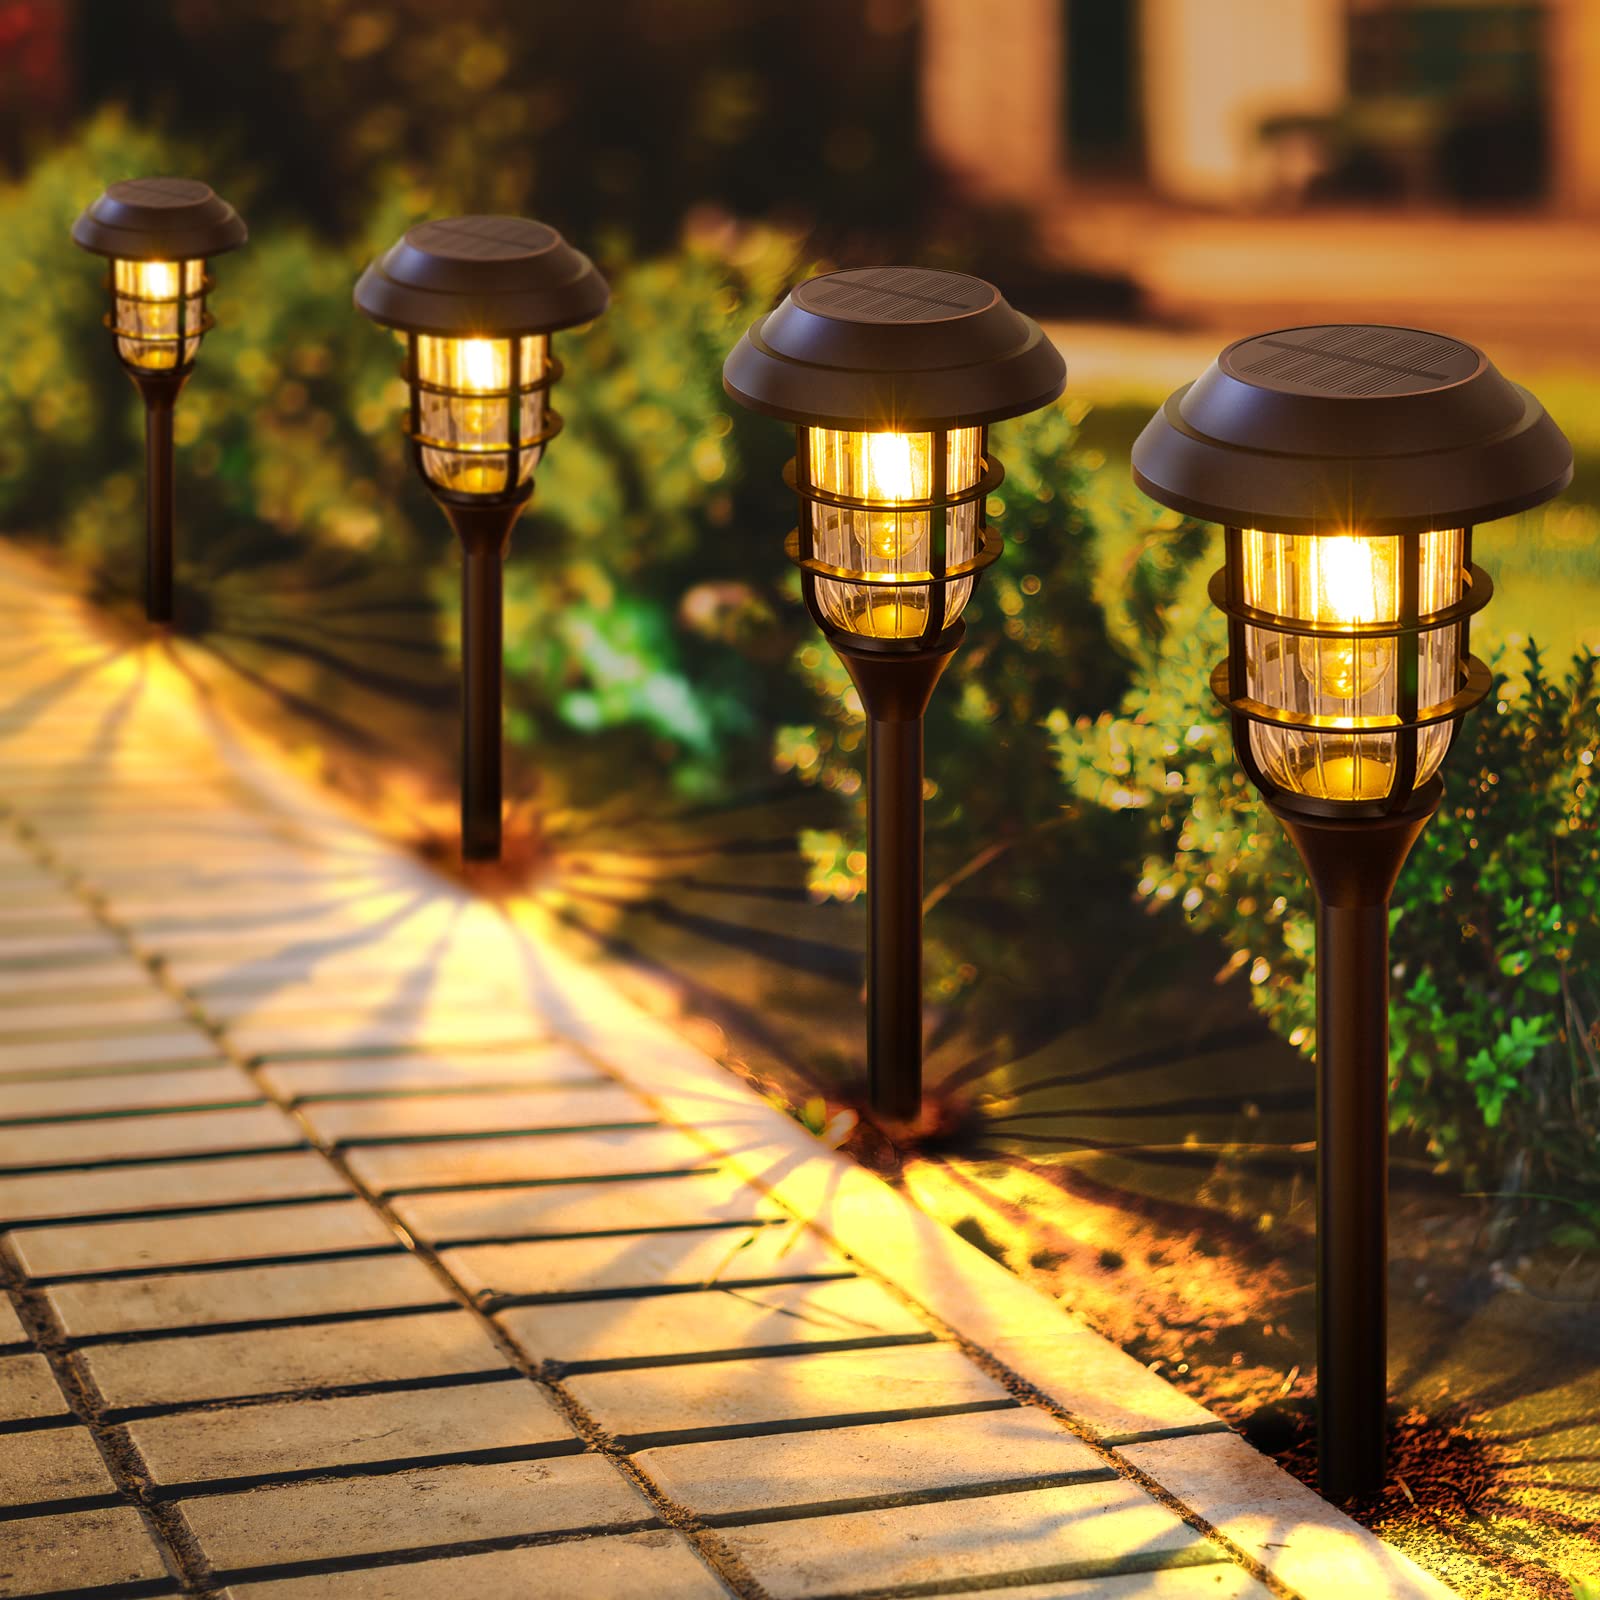 Soft, warm outdoor pathway lights illuminating a meandering garden trail on a tranquil evening.